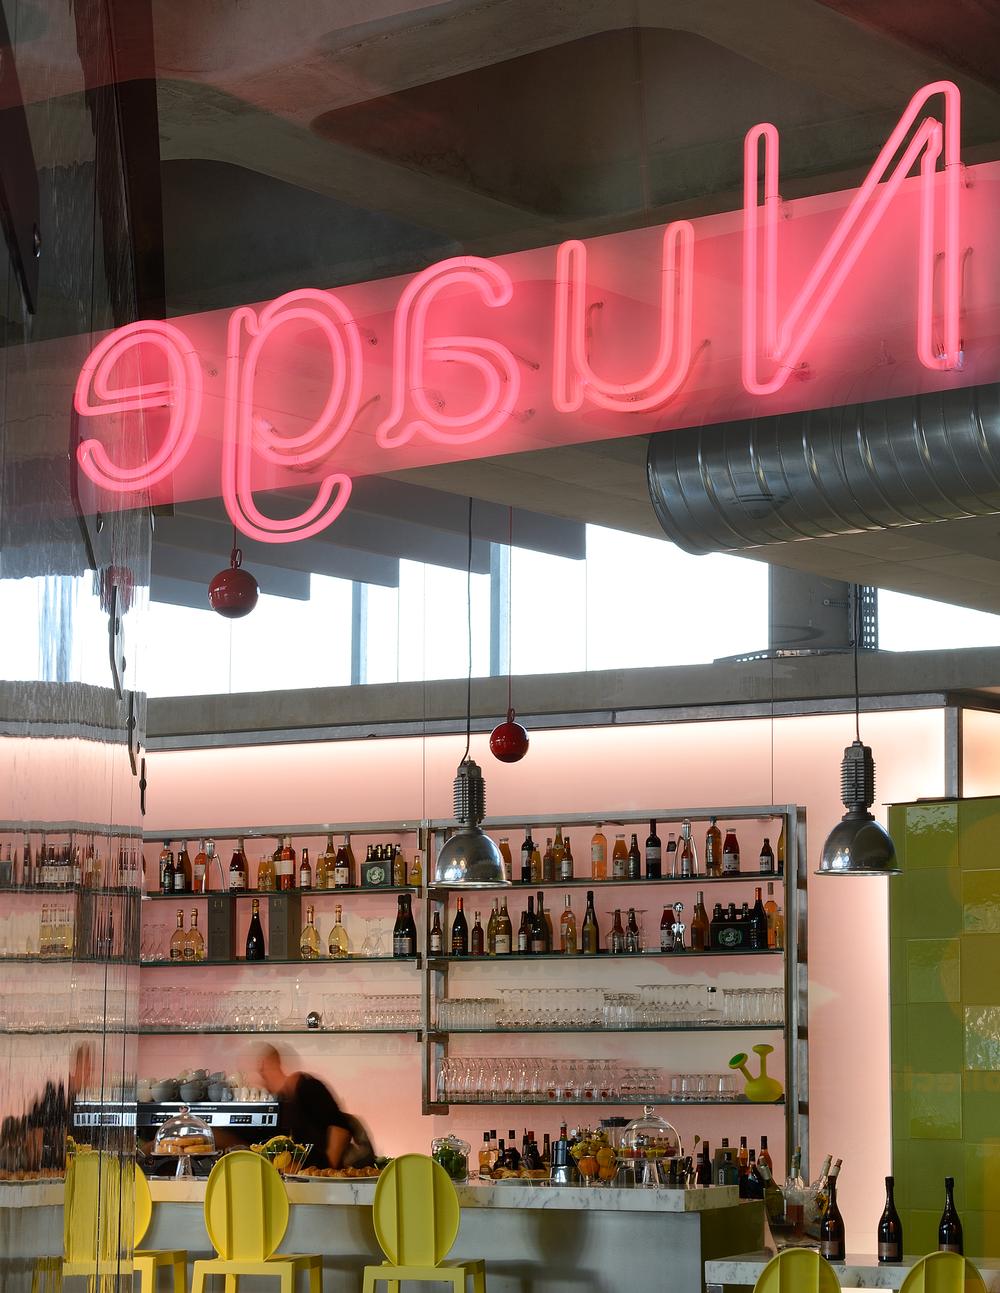 The café bar area features a neon pink sign and a range of lime green furniture and tiling. Starck aimed to create a light, airy feel across the health club, while adding a sense of fun